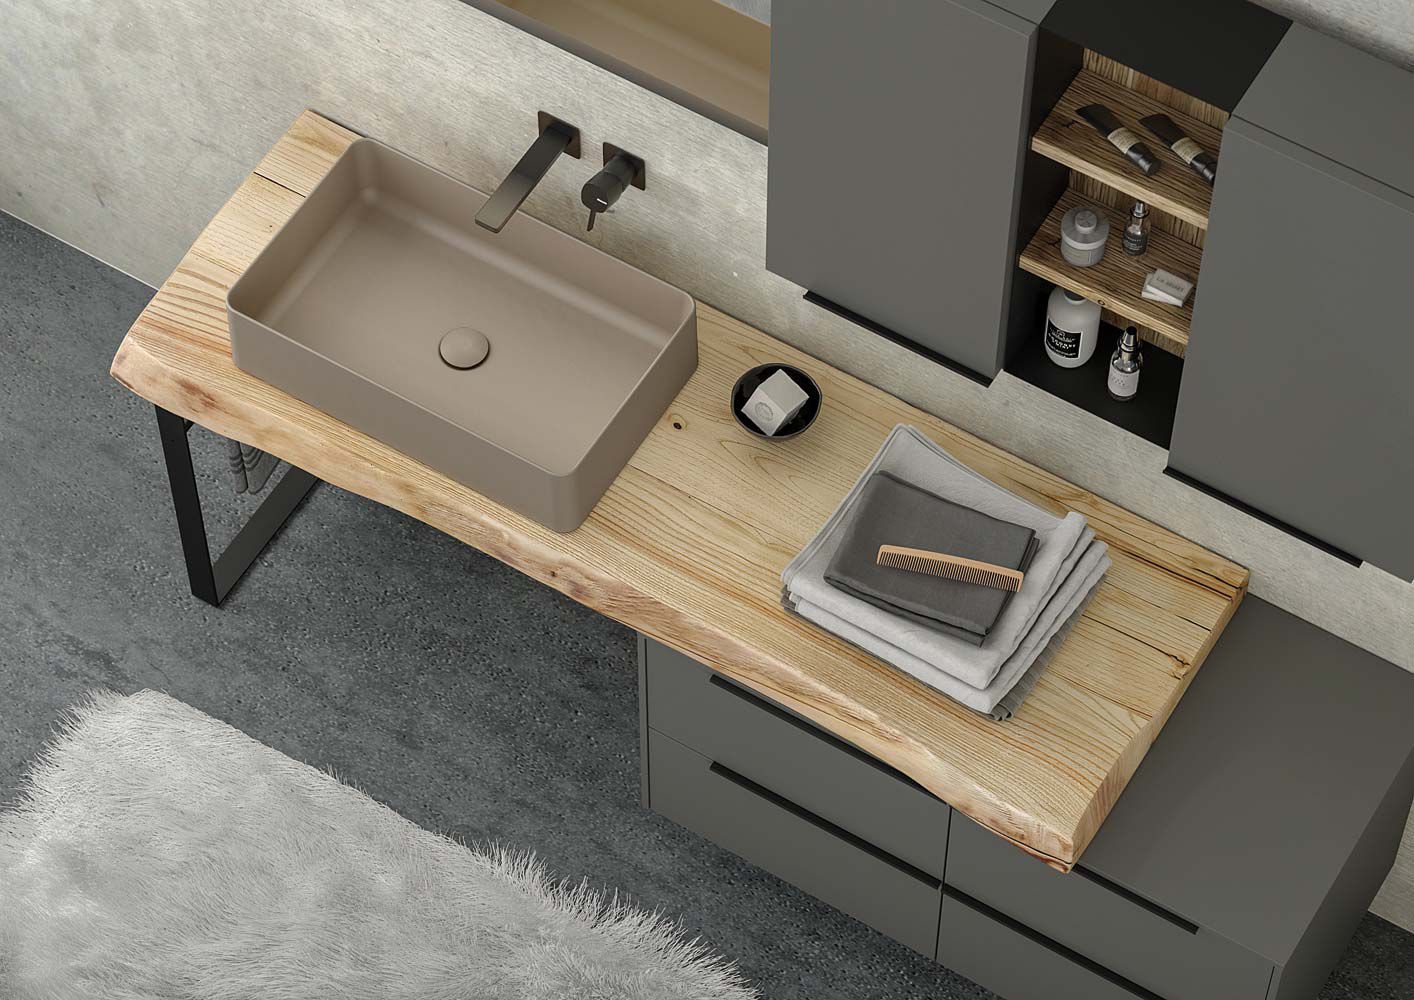 What Makes For A Good Wooden Vanity For My Bathroom?